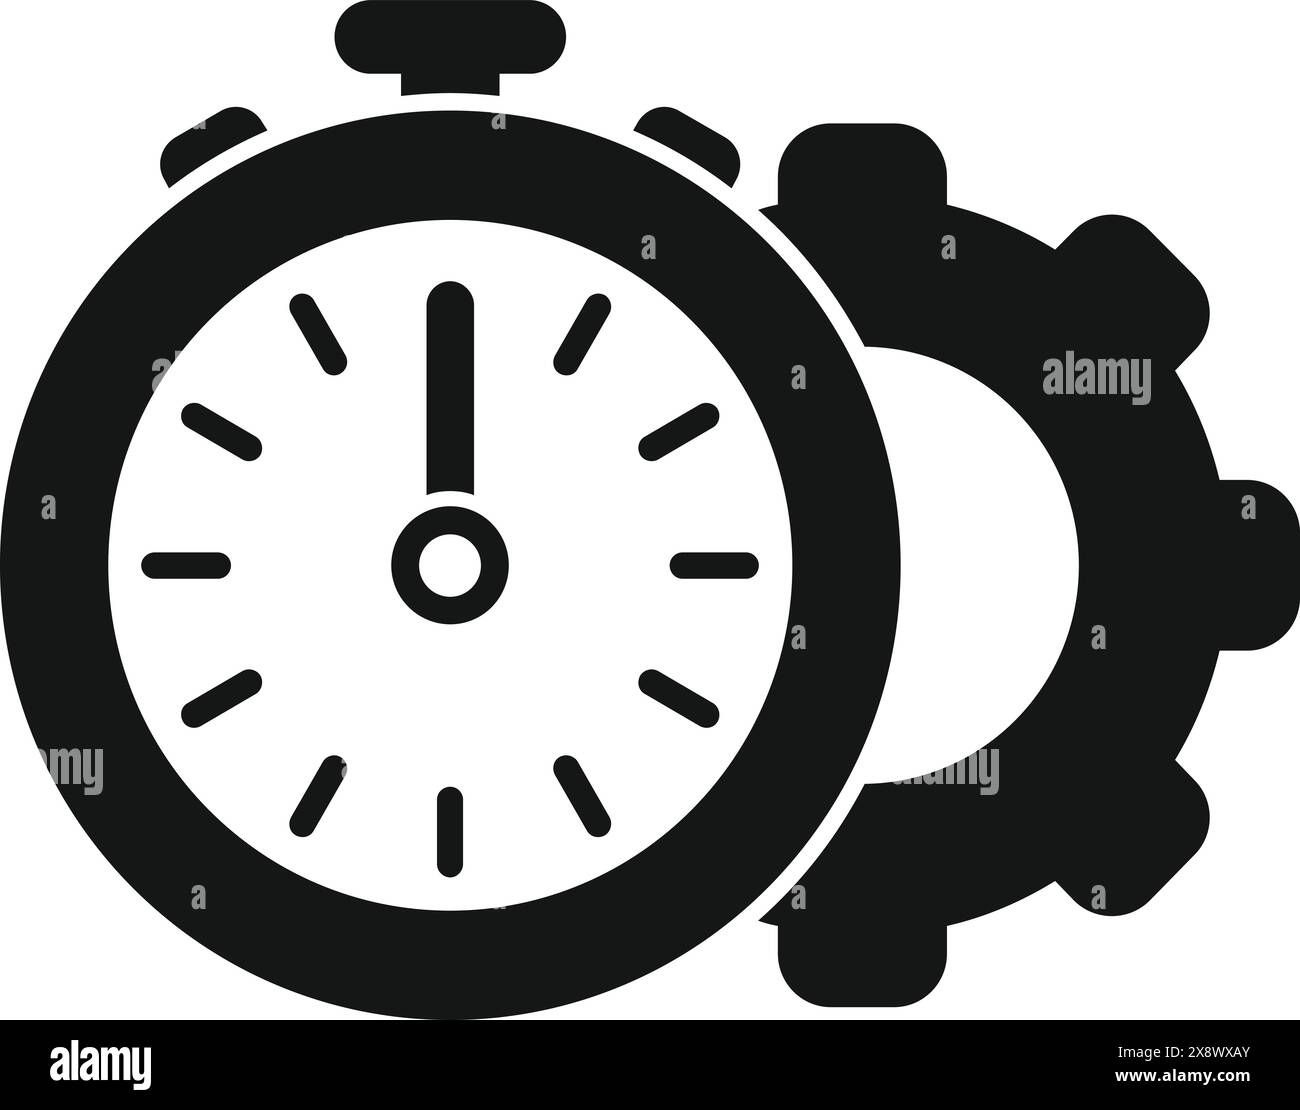 Efficiency and productivity time management concept icon with stopwatch and gears in black and white. Creative vector illustration design for business strategy, planning, and organization Stock Vector